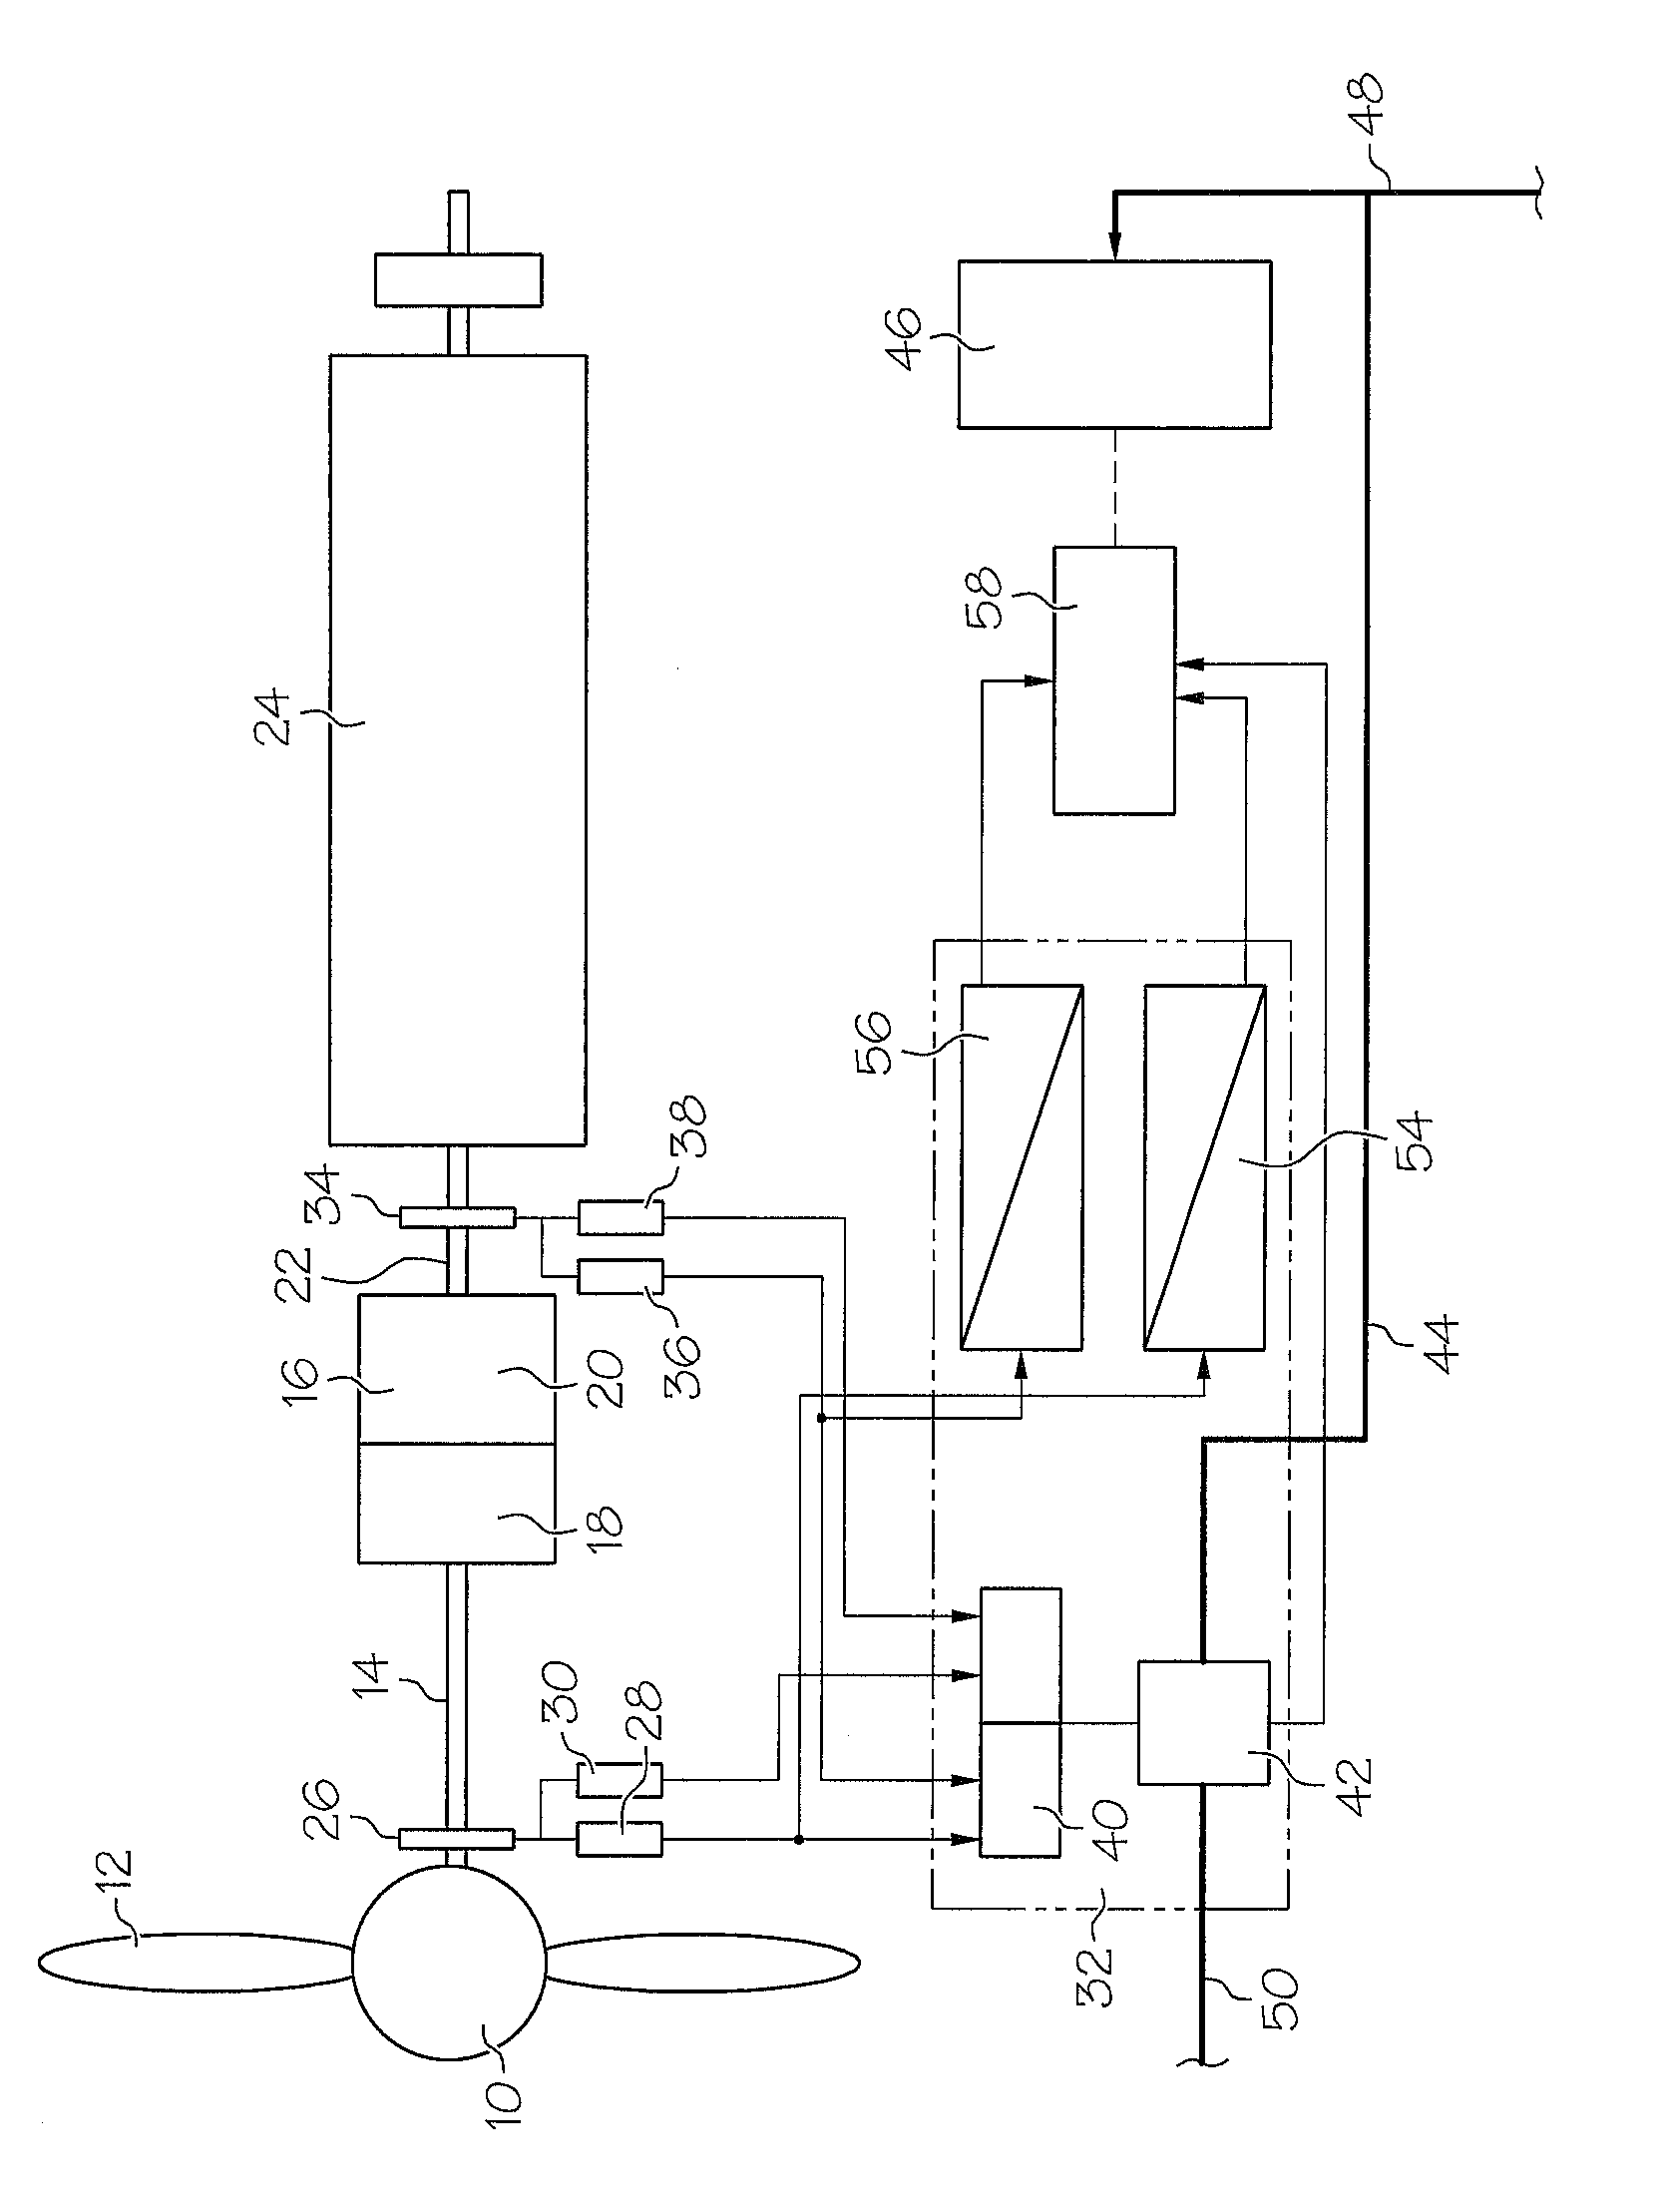 Apparatus for monitoring the rotational speed in a wind energy plant